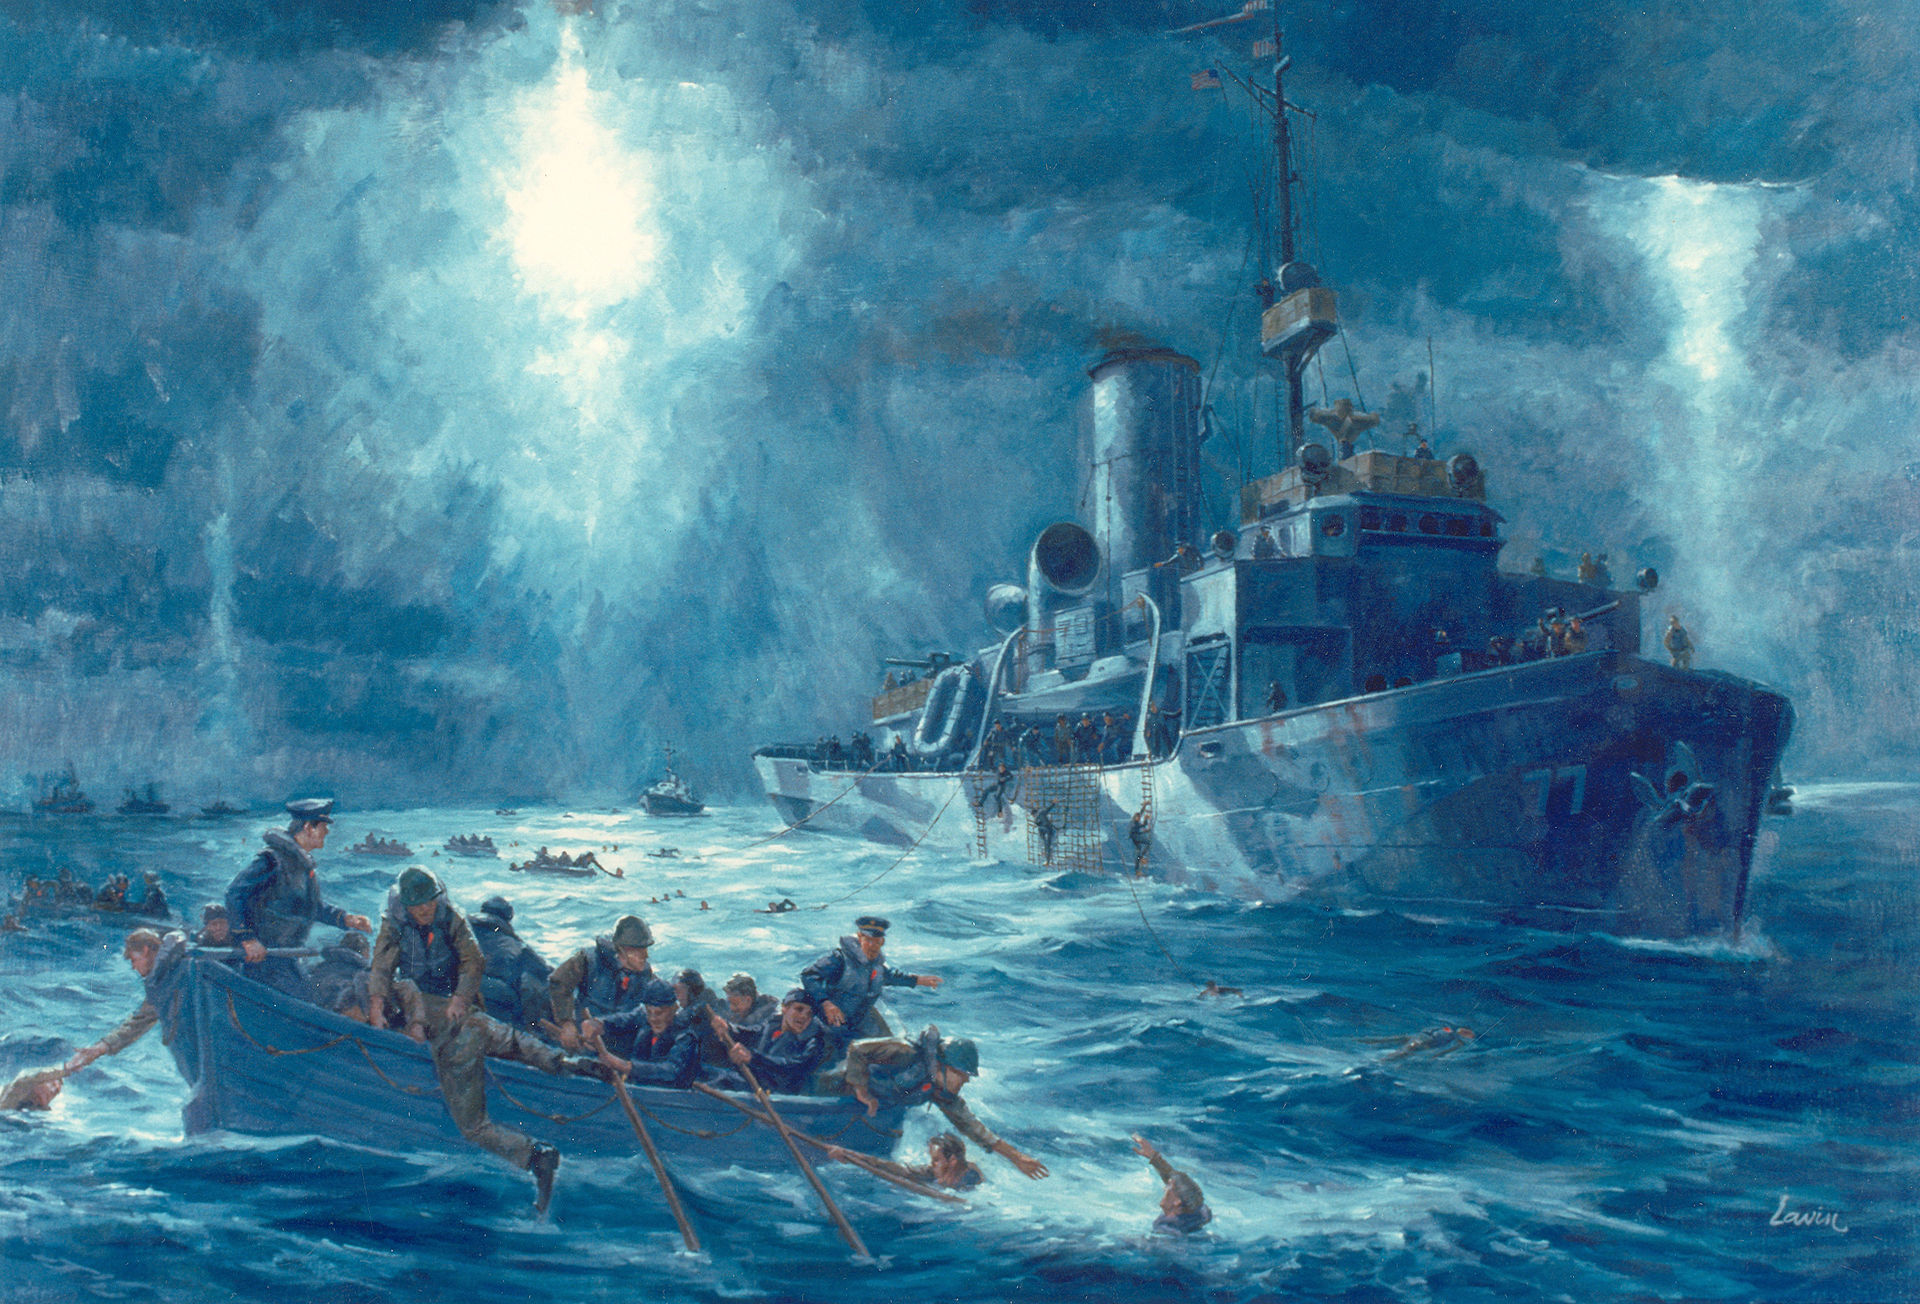 Painting of the rescue of USAT Dorchester survivors by USCGC Escanaba (WPG-77) on 3 February 1943 in the North Atlantic Ocean. -